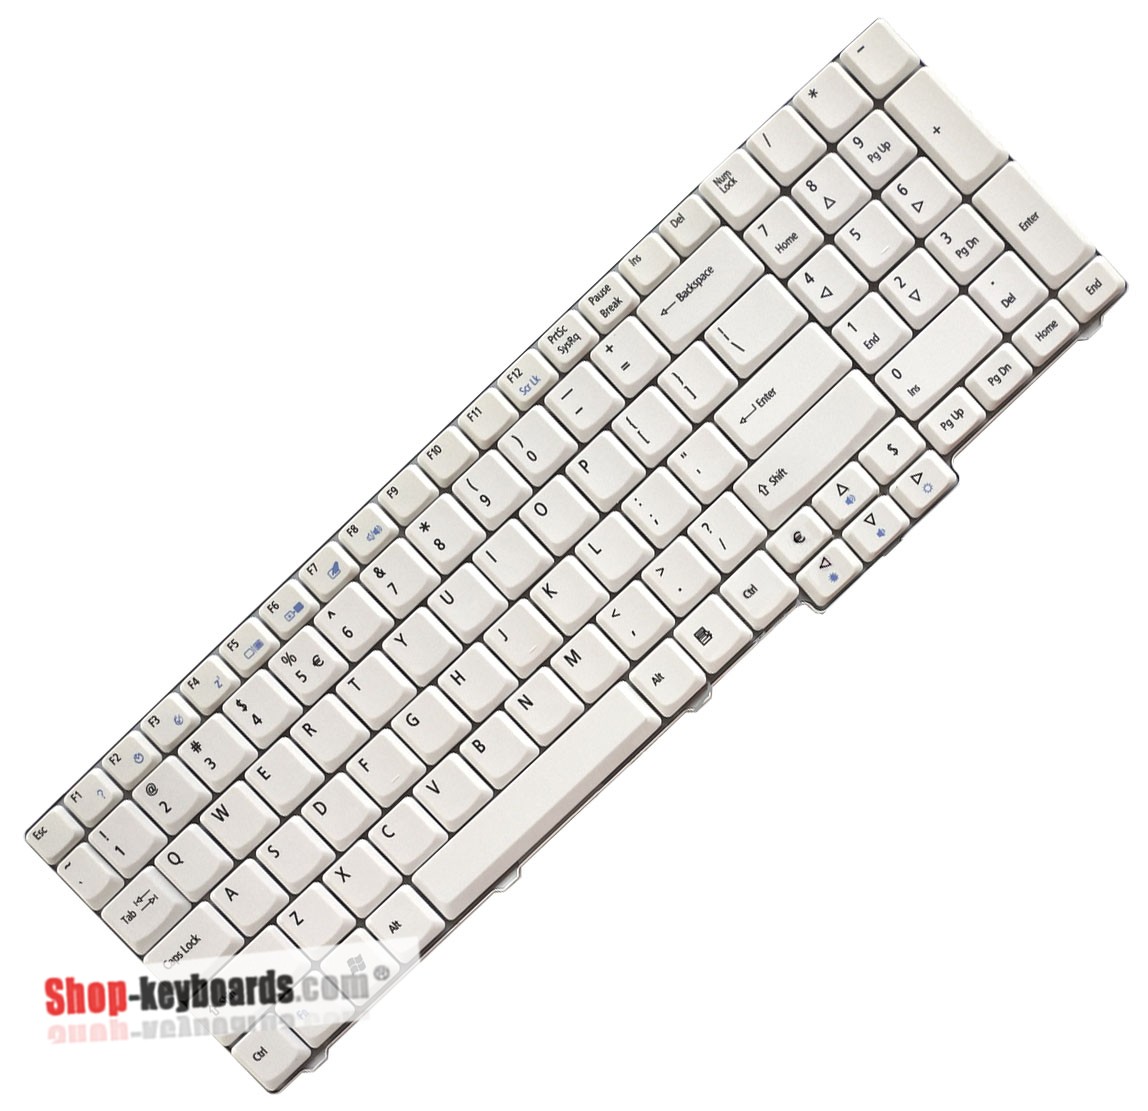 Acer Aspire 6530-5195 Keyboard replacement